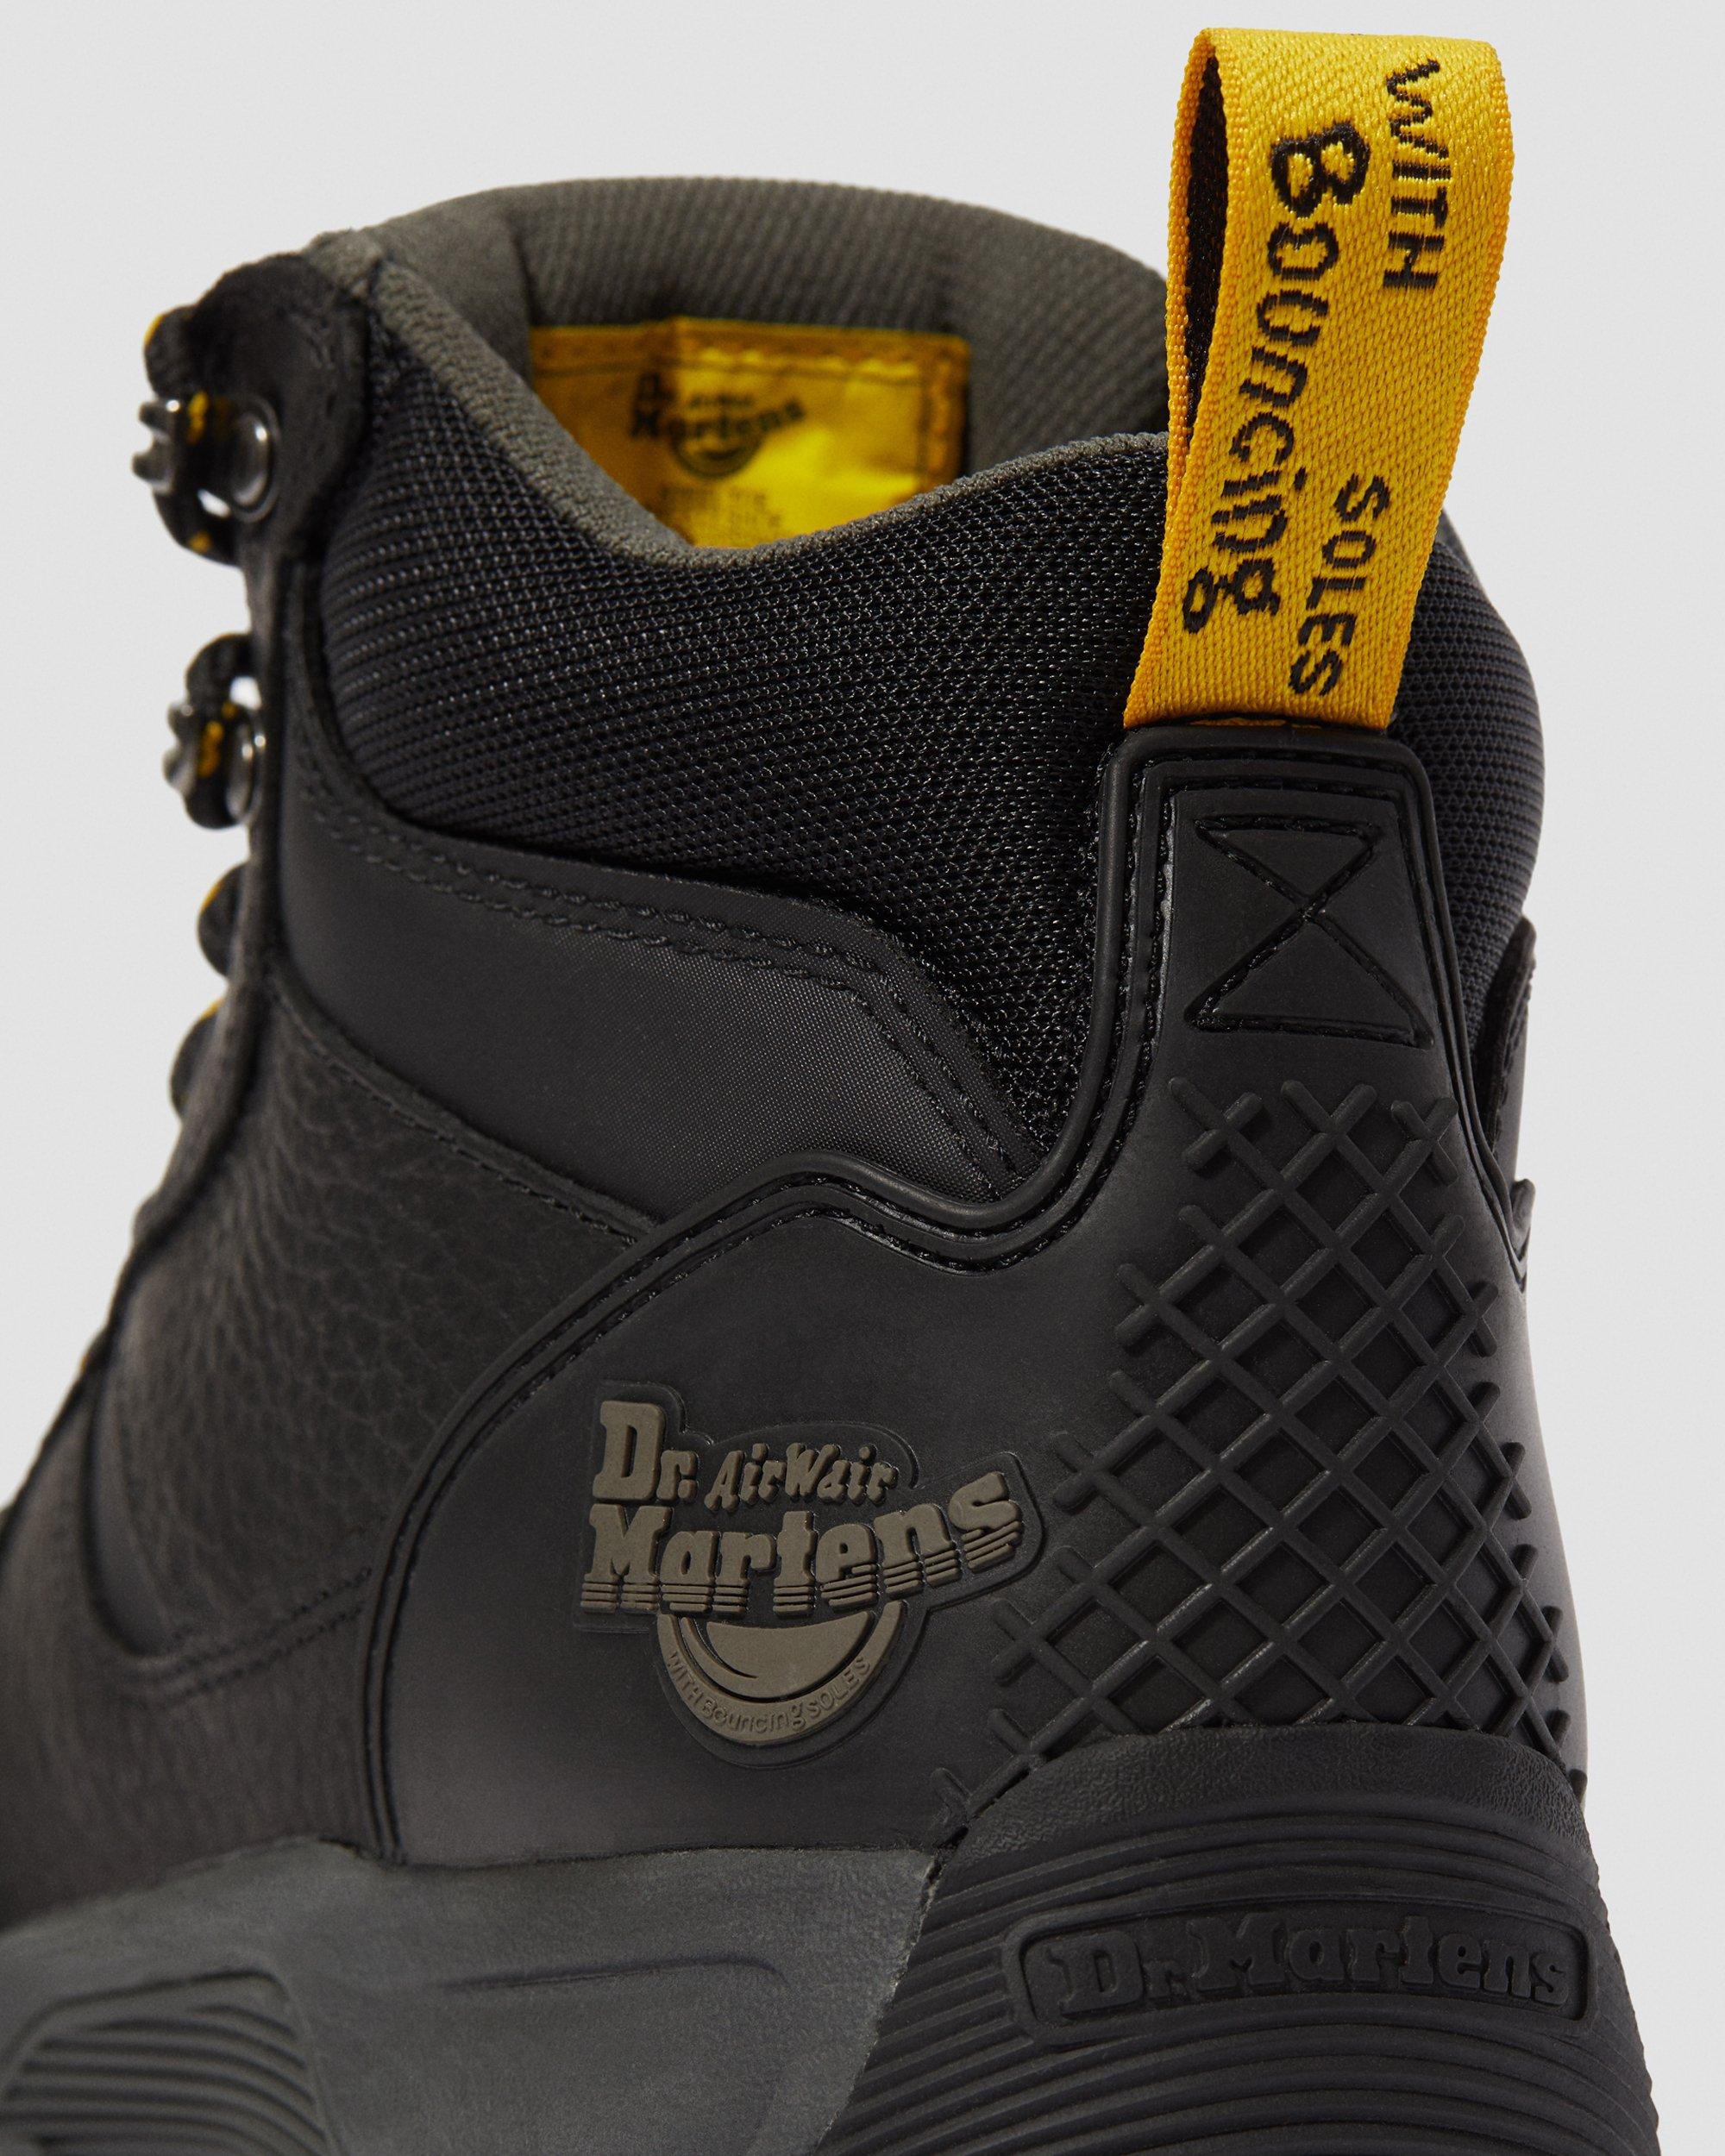 dr martens grapple safety boots